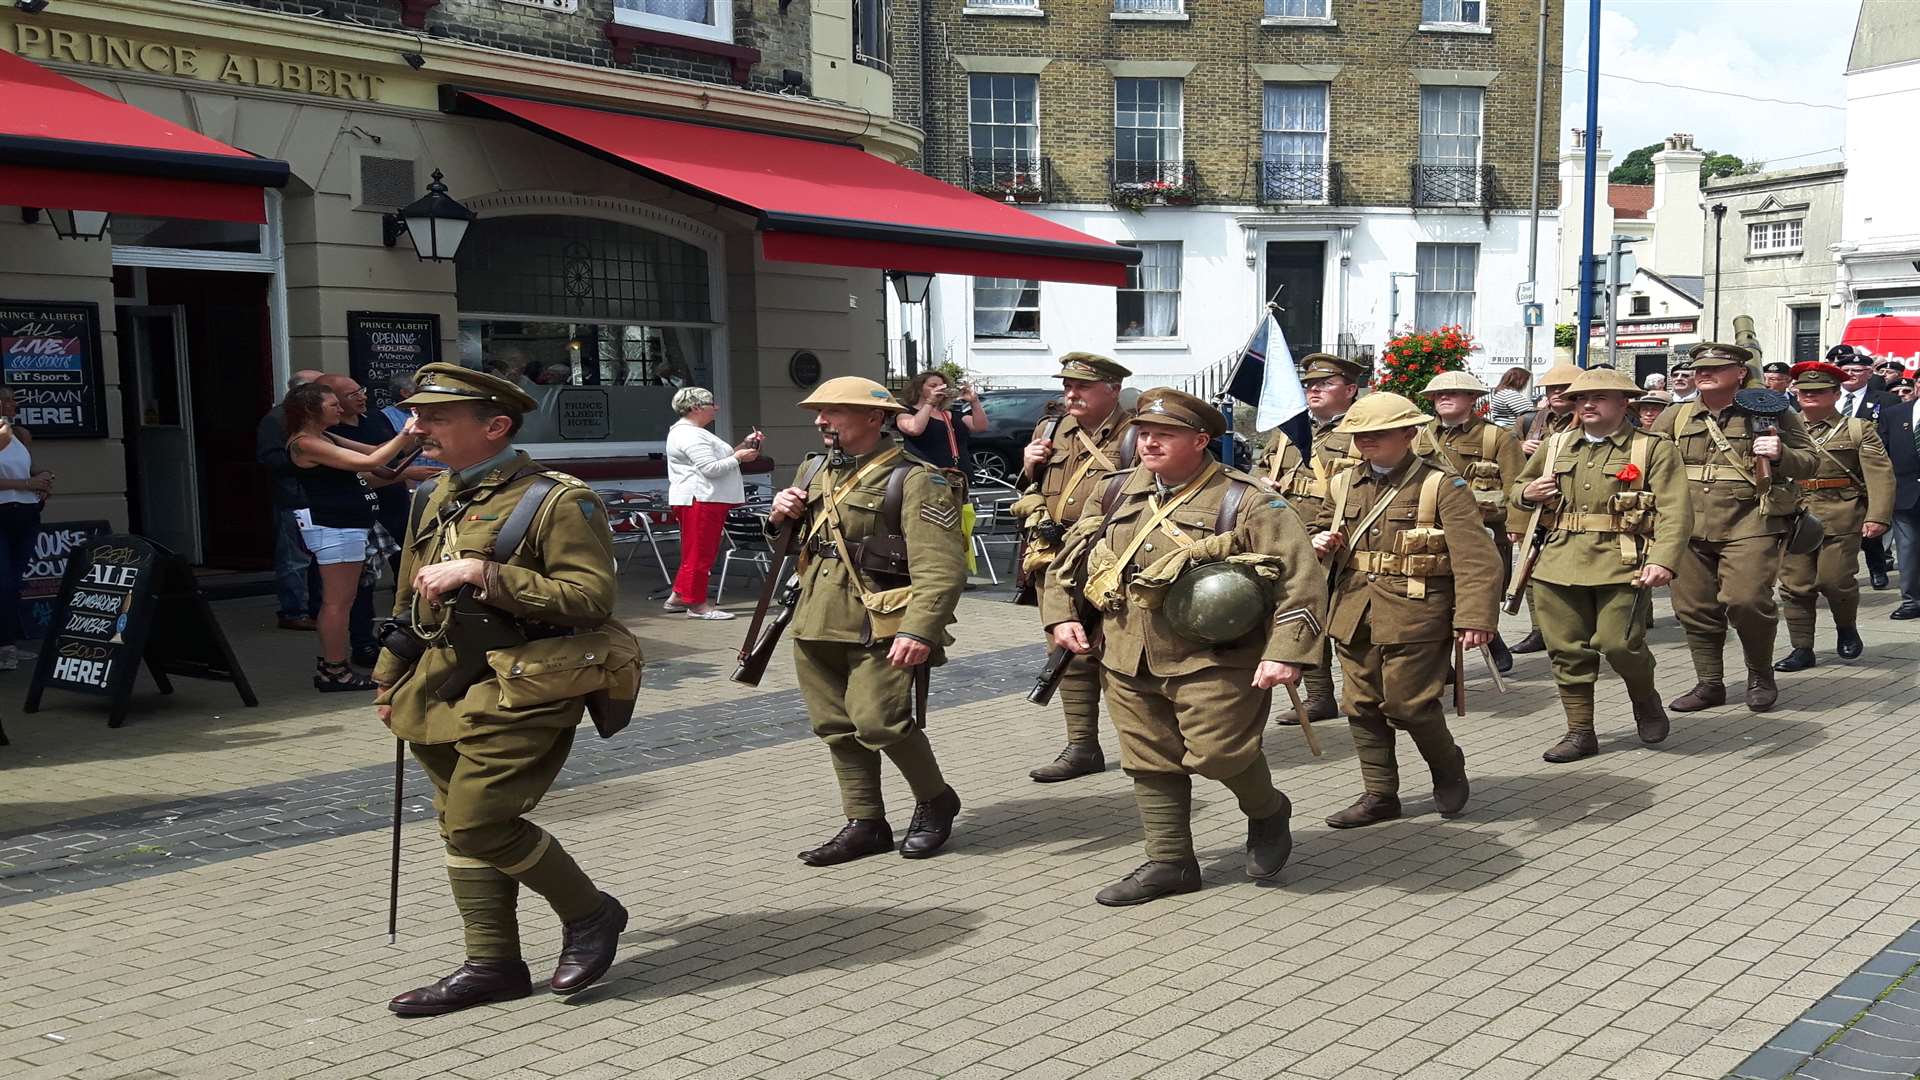 First World War re-enactors march through Dover to commemorate the Somme.